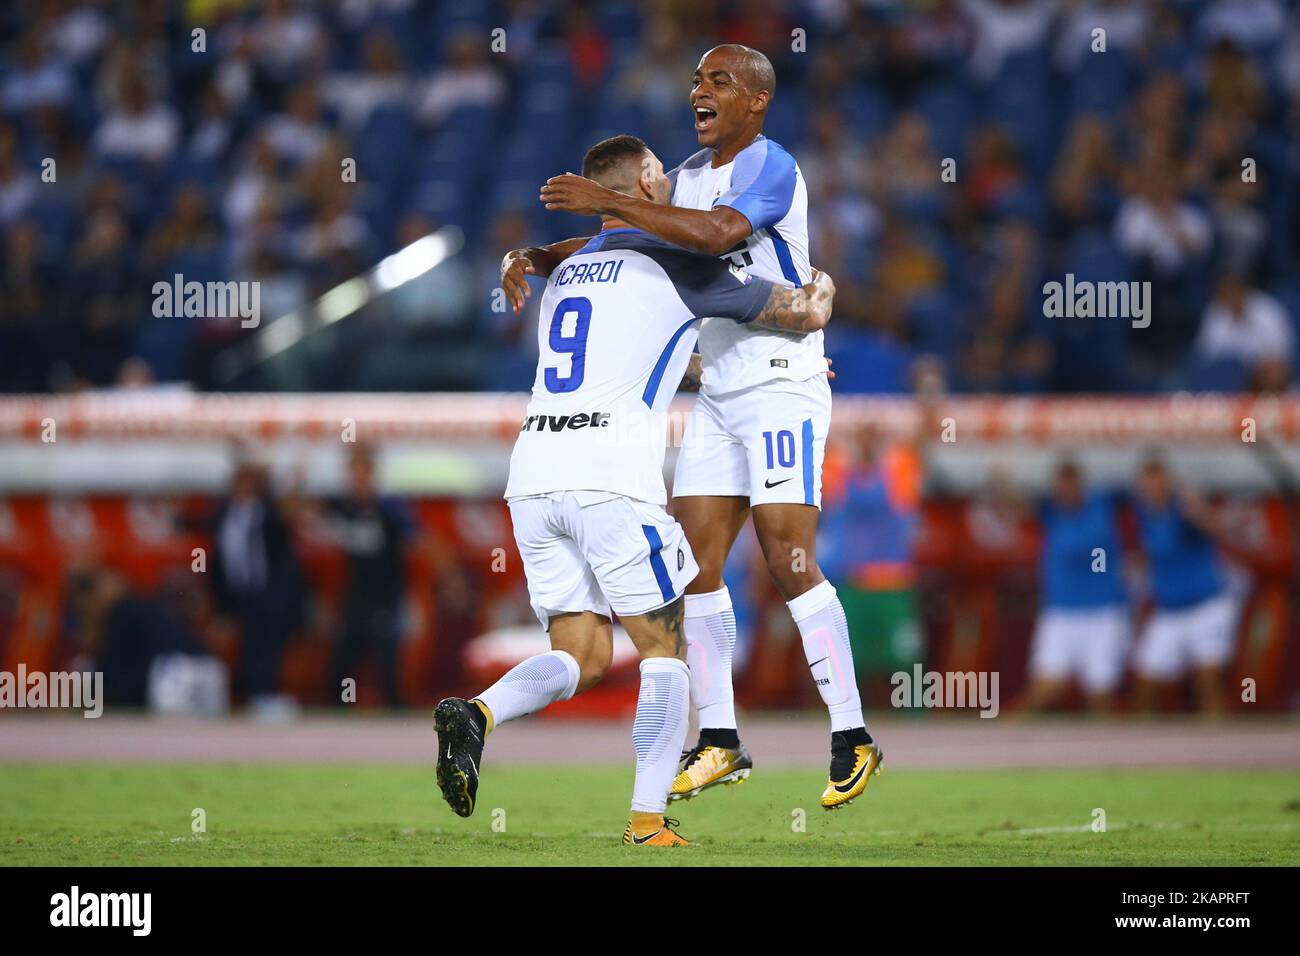 Mauro Icardi of Internazionale and Joao Mario of Internazionale celebration after the goal of scoring the goal of 1-2 scored during the Serie A match between AS Roma and FC Internazionale at Olimpico Stadium in Rome, Italy, on August 26, 2017. (Photo by Matteo Ciambelli/NurPhoto)  Stock Photo